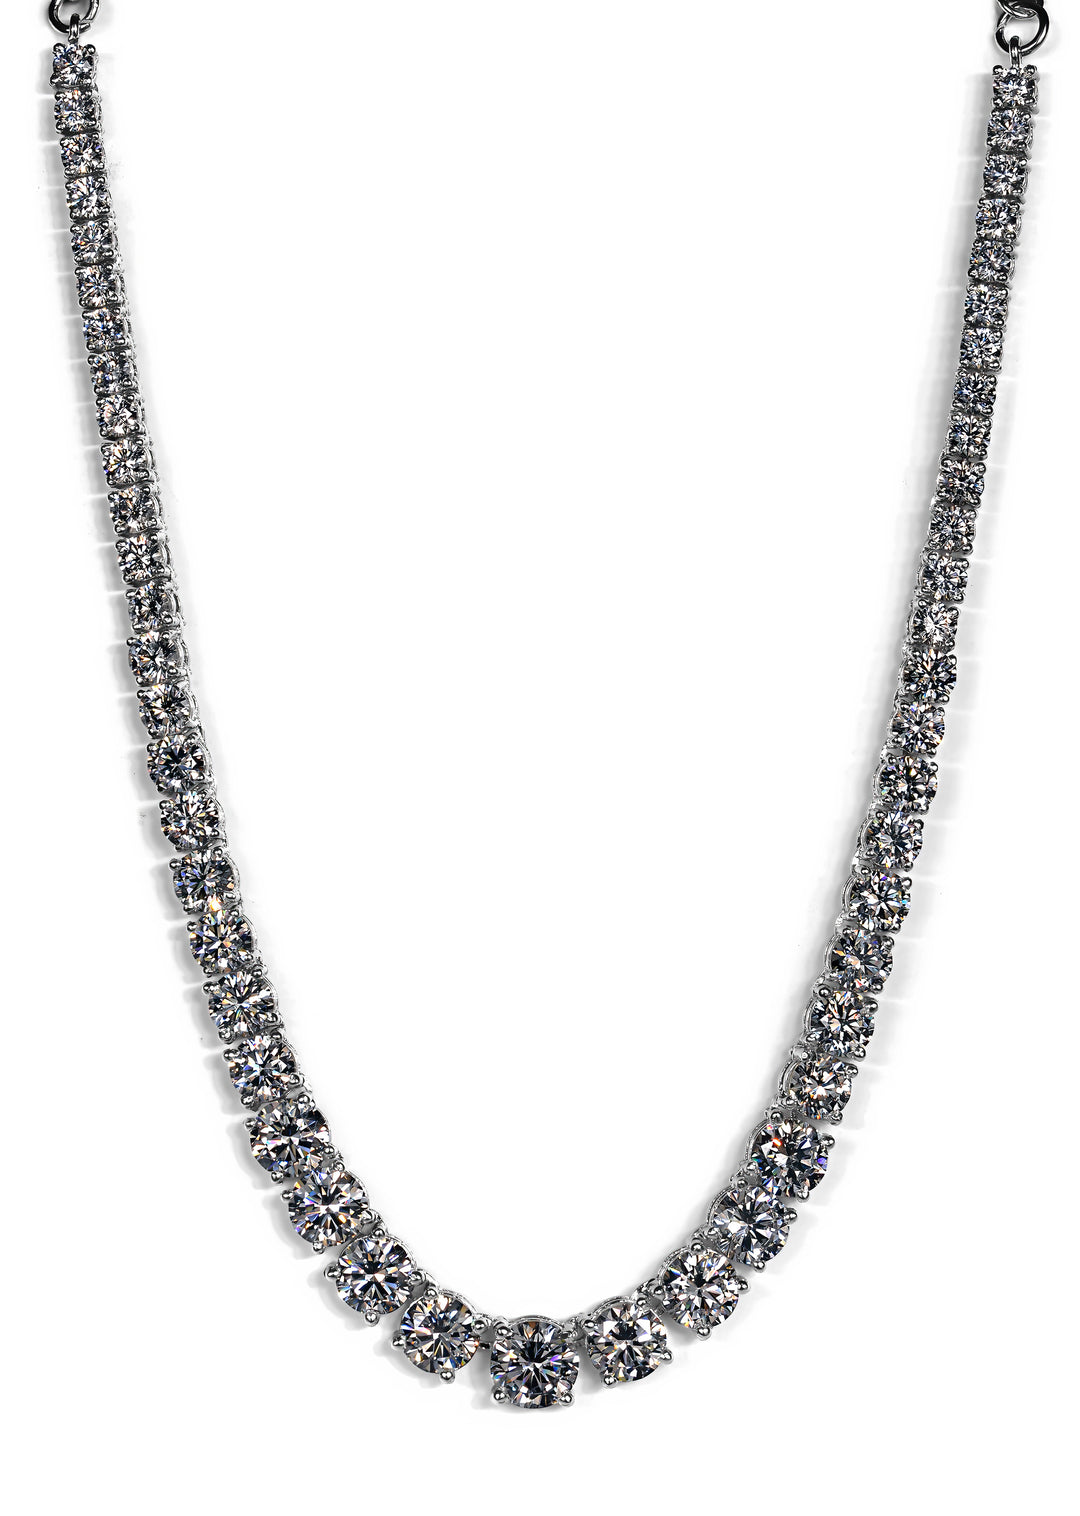 Iced out moissanite diamond substitute necklace in 925 silver handcrafted by Zanvari's skilled craftsmen